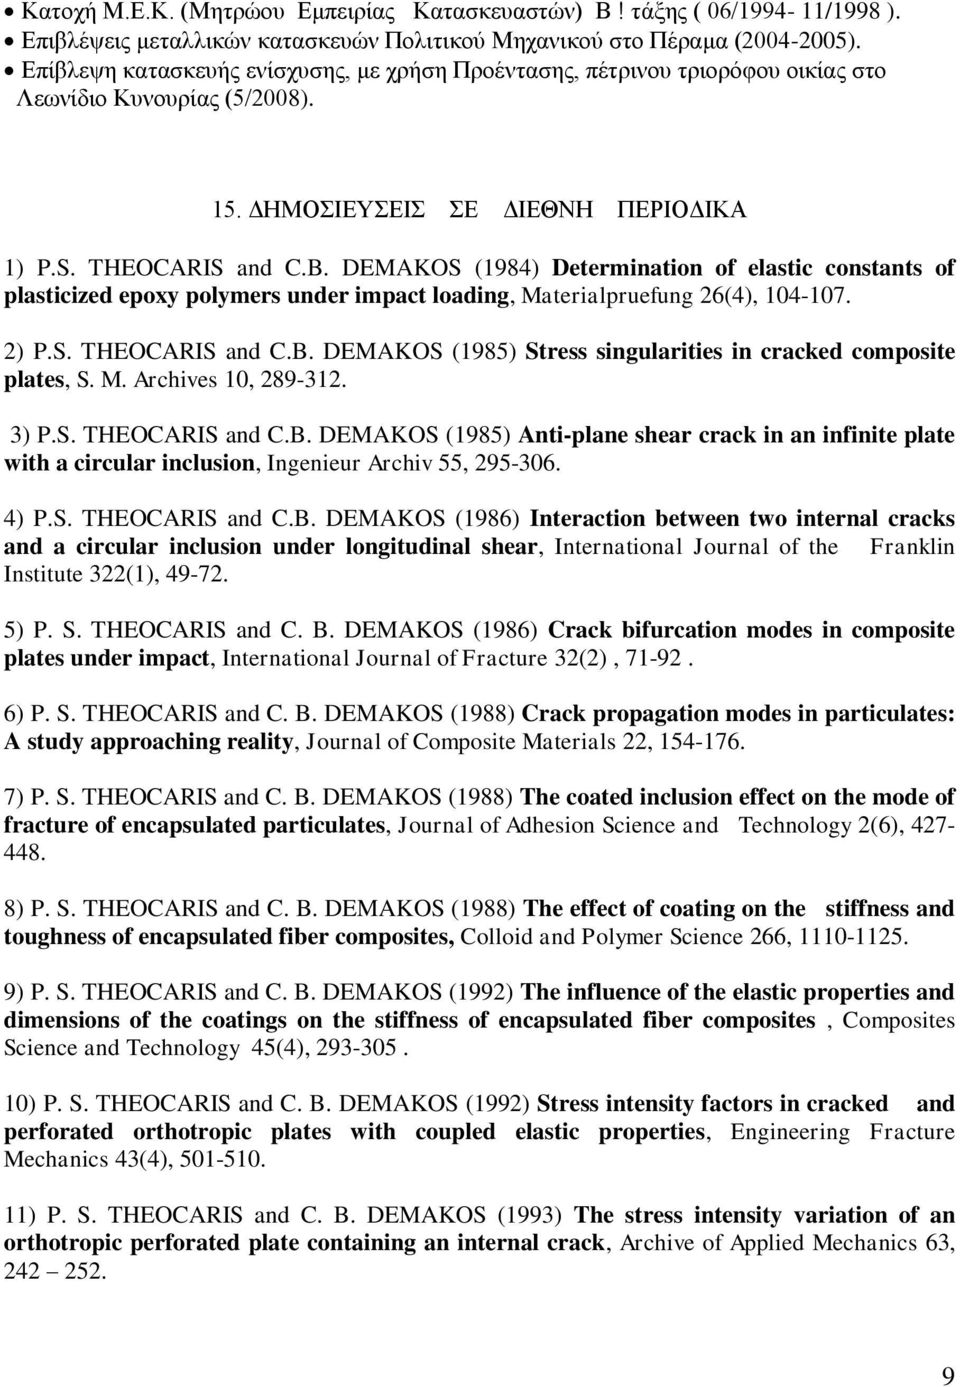 DEMAKOS (1984) Determination of elastic constants of plasticized epoxy polymers under impact loading, Materialpruefung 26(4), 104-107. 2) P.S. THEOCARIS and C.B.